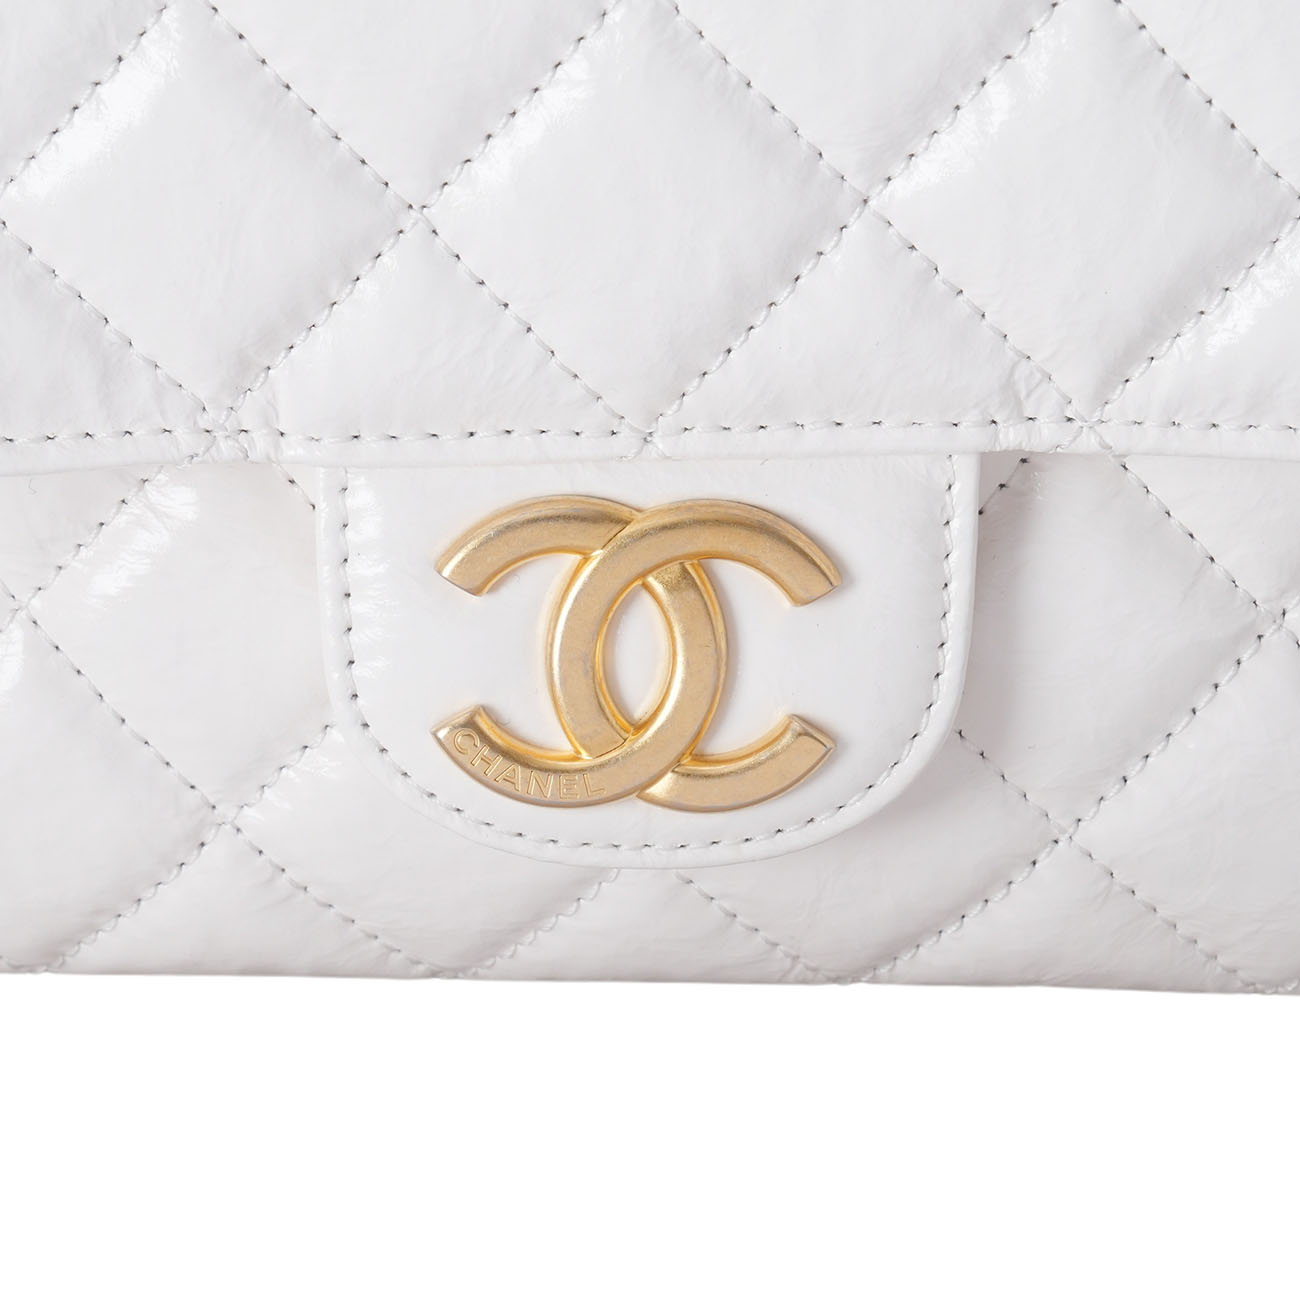 CHANEL(USED)샤넬 AS4322 페이던트 호보백 미듐